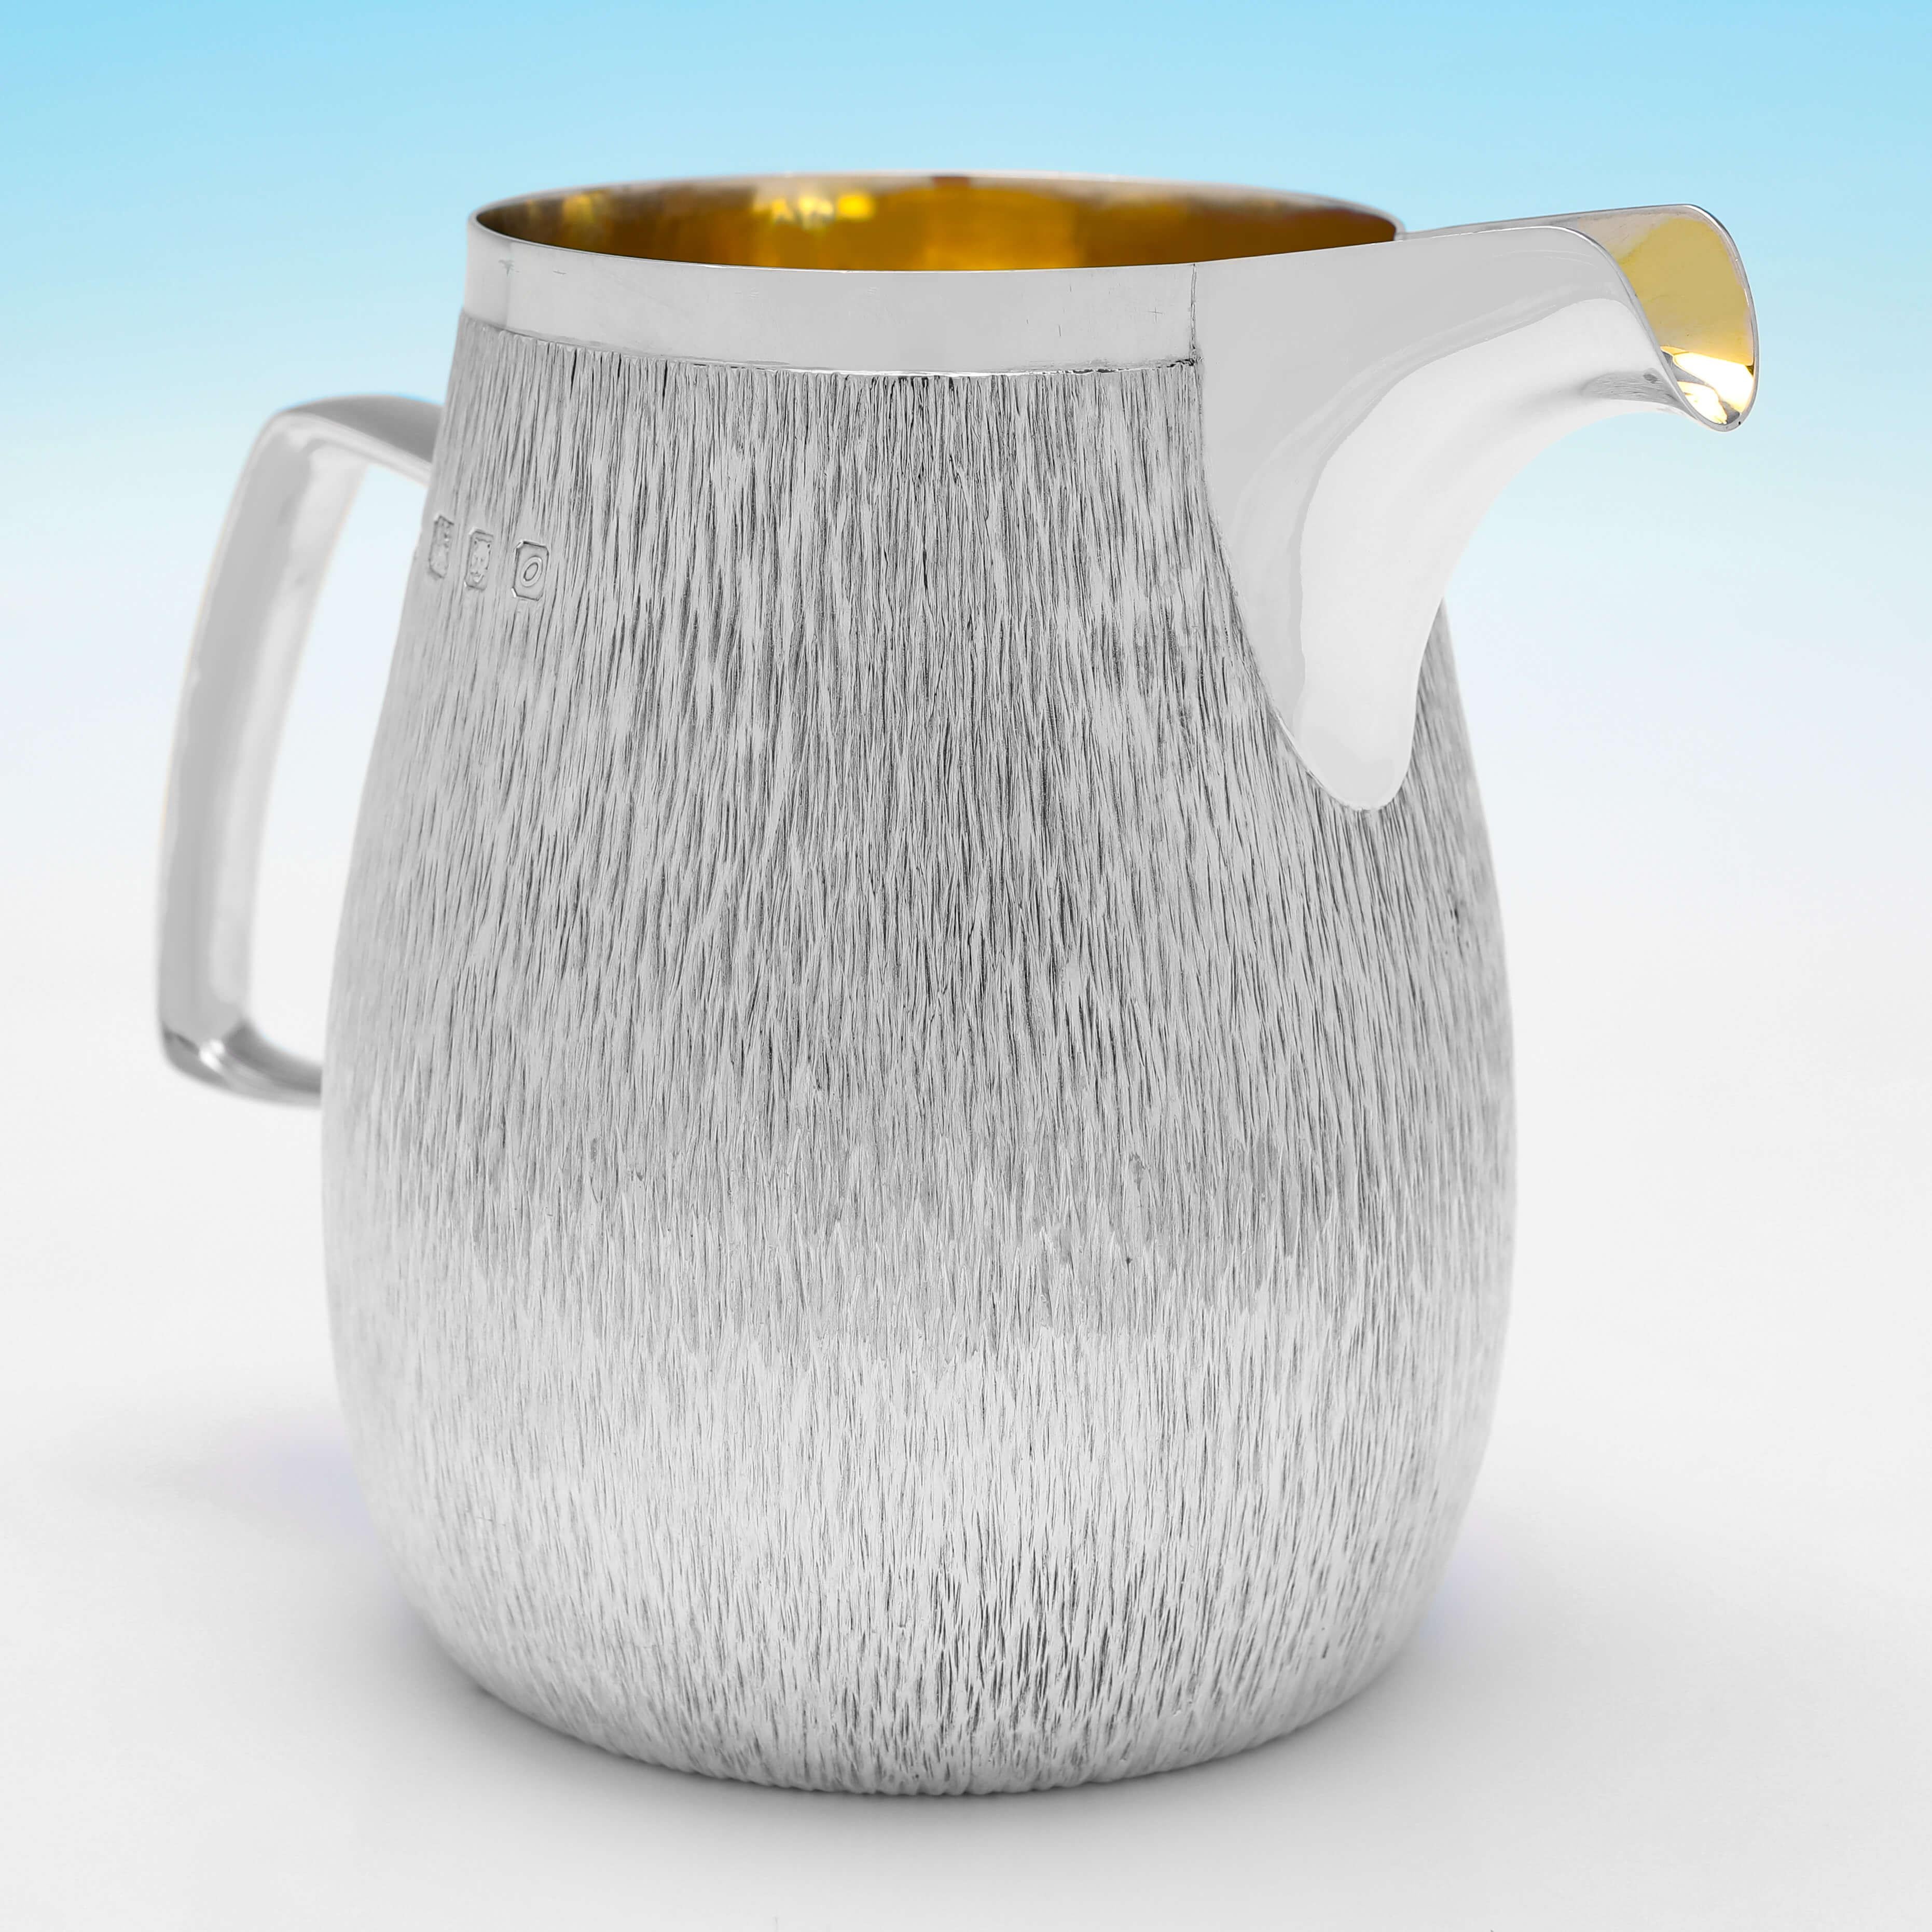 Hallmarked in London in 1969 by Gerald Benney, this very stylish, Sterling Silver Water Jug, features a gilt interior, and a bark effect finish. 

The jug measures 5.25